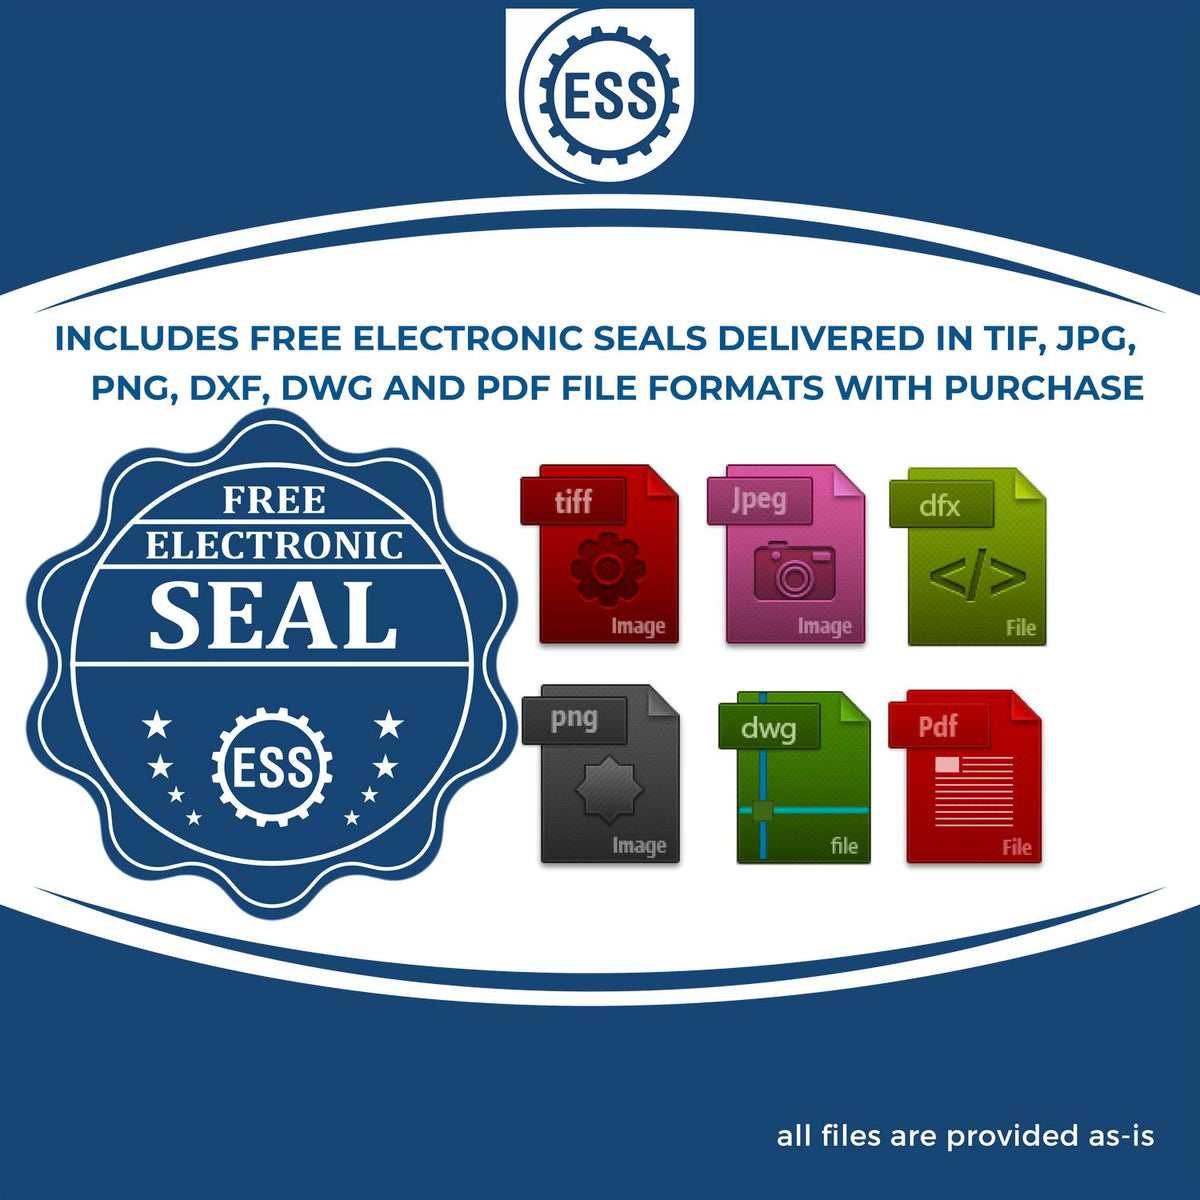 An infographic for the free electronic seal for the Extended Long Reach Idaho Architect Seal Embosser illustrating the different file type icons such as DXF, DWG, TIF, JPG and PNG.